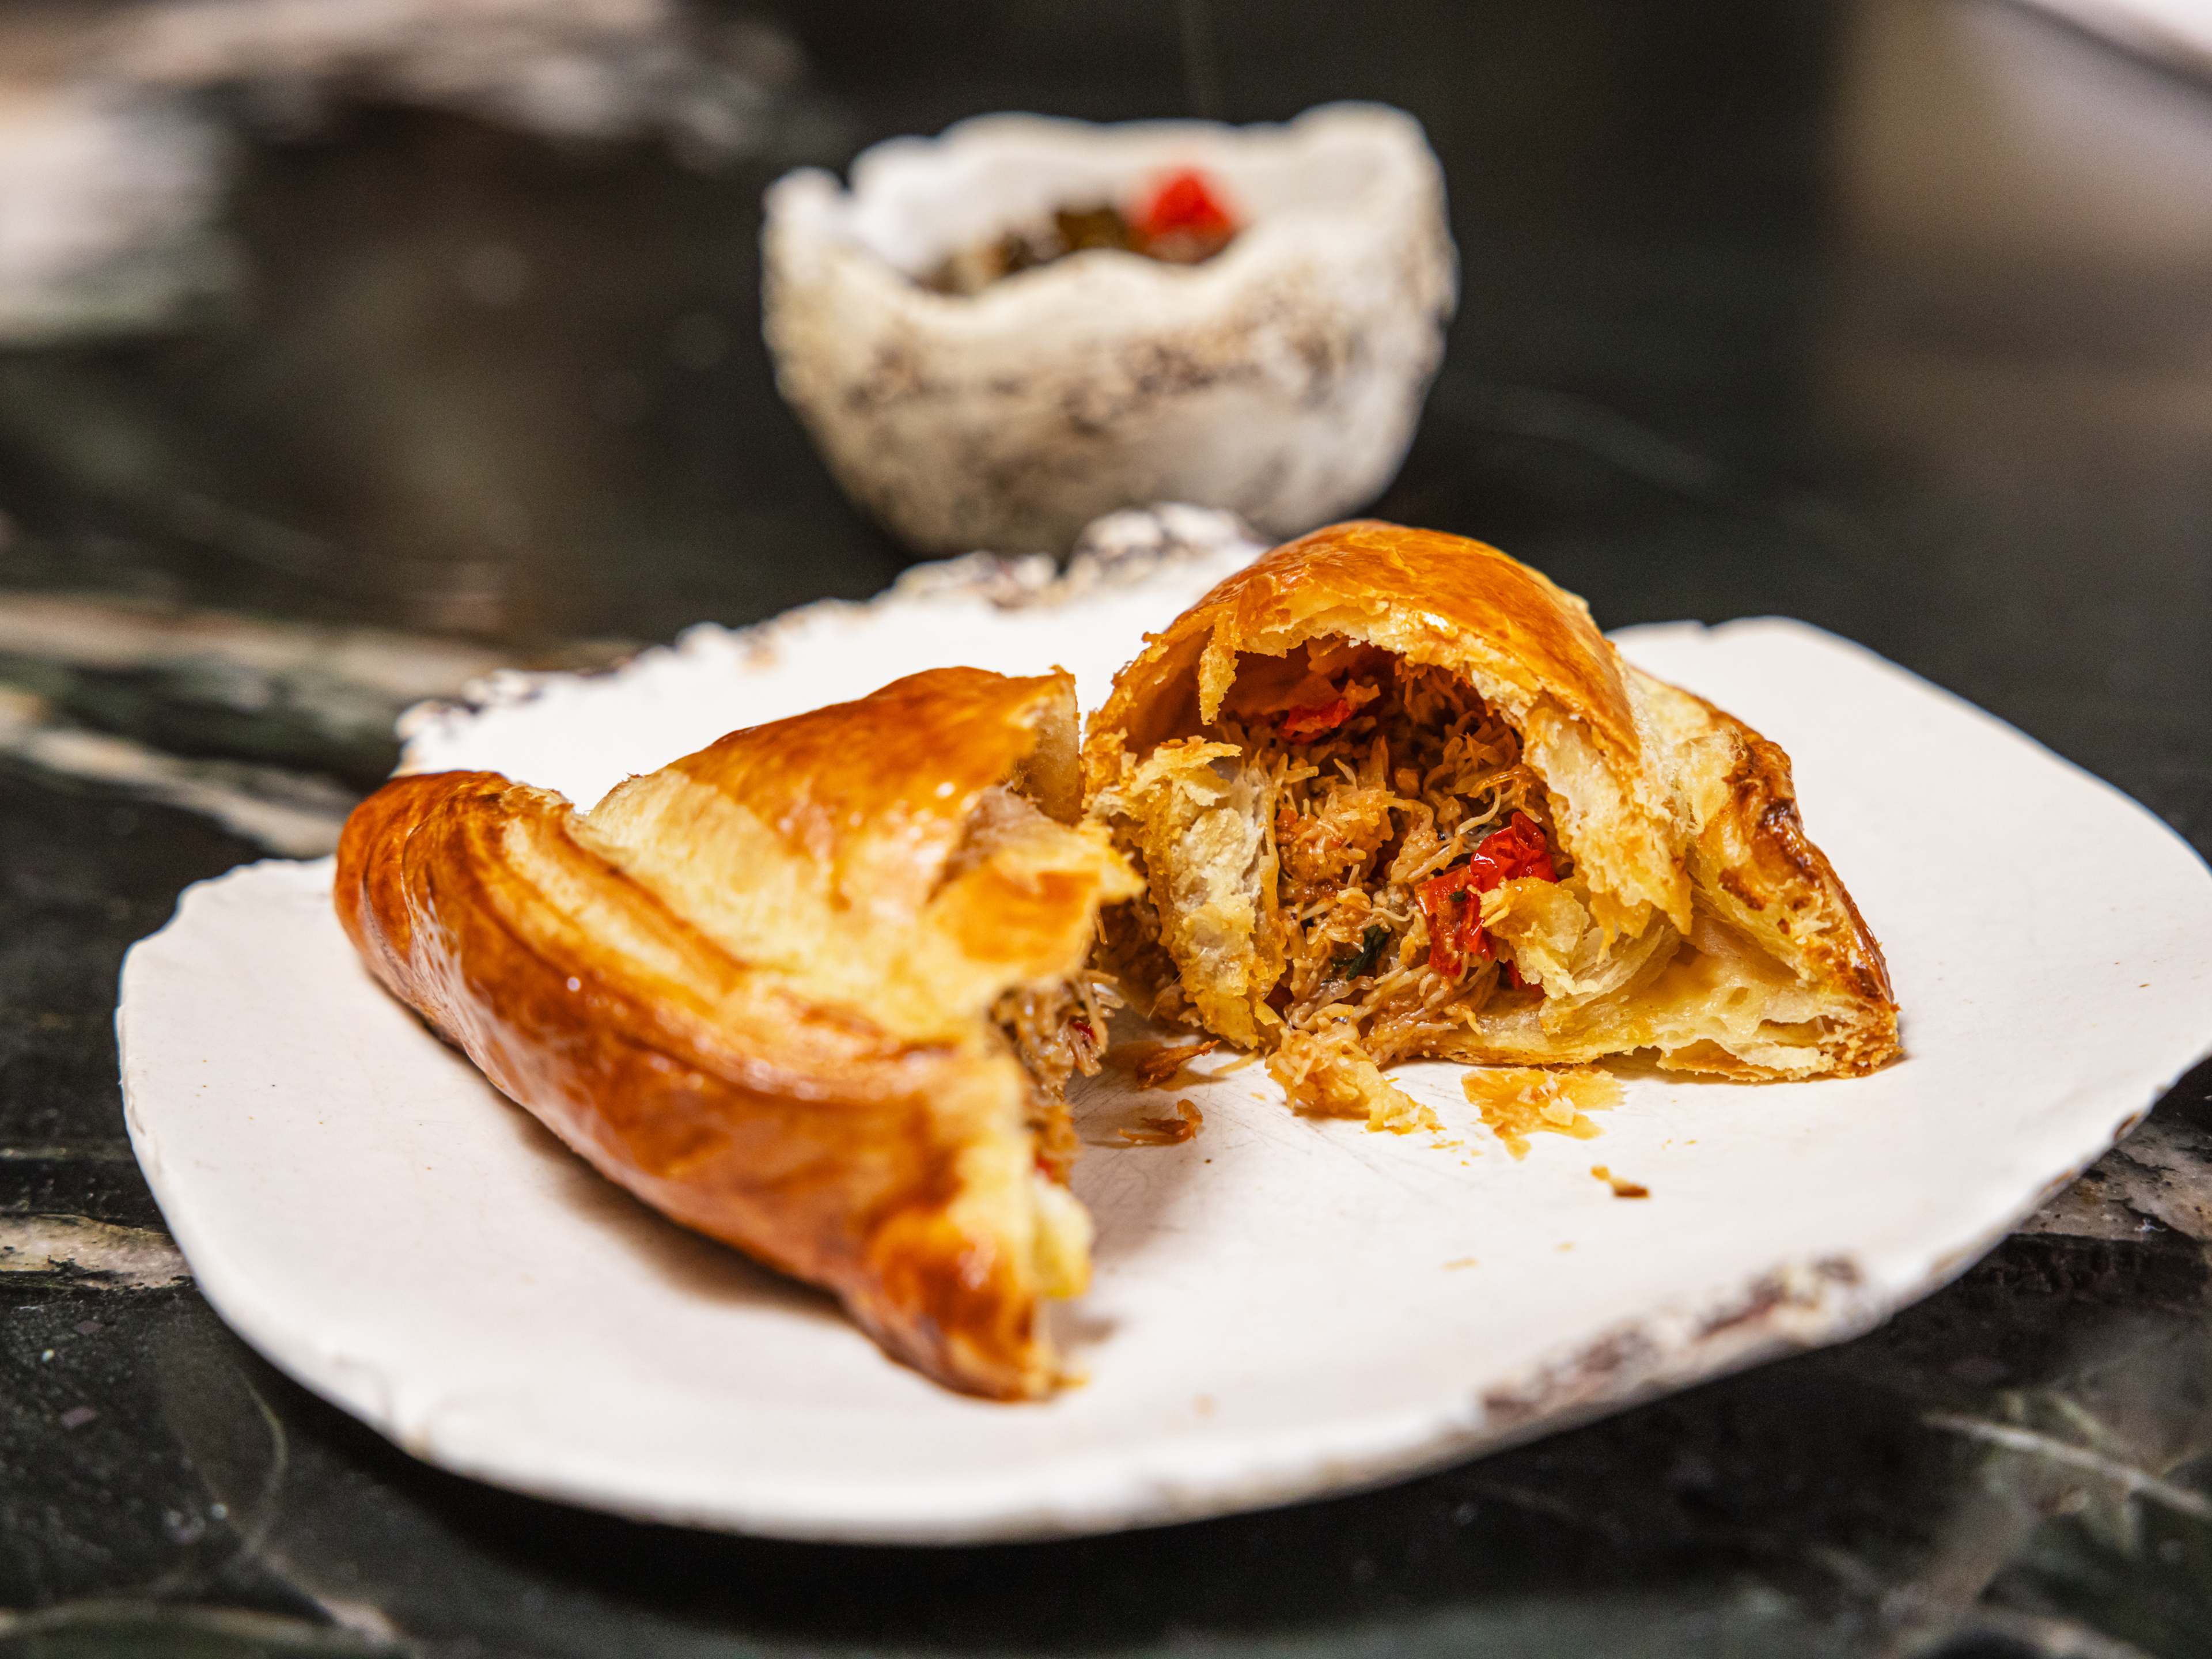 A large empanada split in half to show the crab inside.